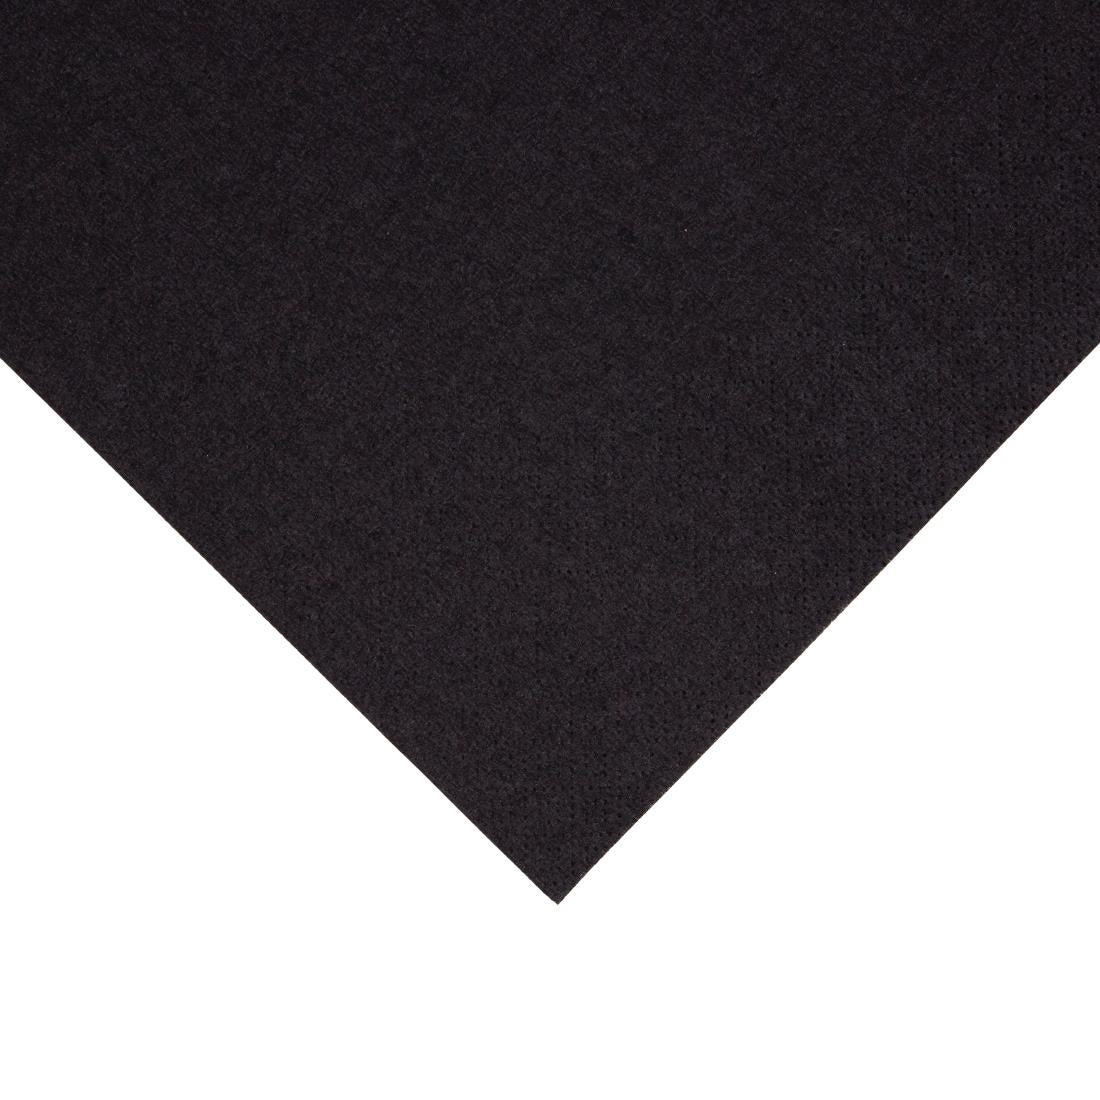 FE225 Fiesta Recyclable Lunch Napkin Black 33x33cm 2ply 1/4 Fold (Pack of 2000) JD Catering Equipment Solutions Ltd